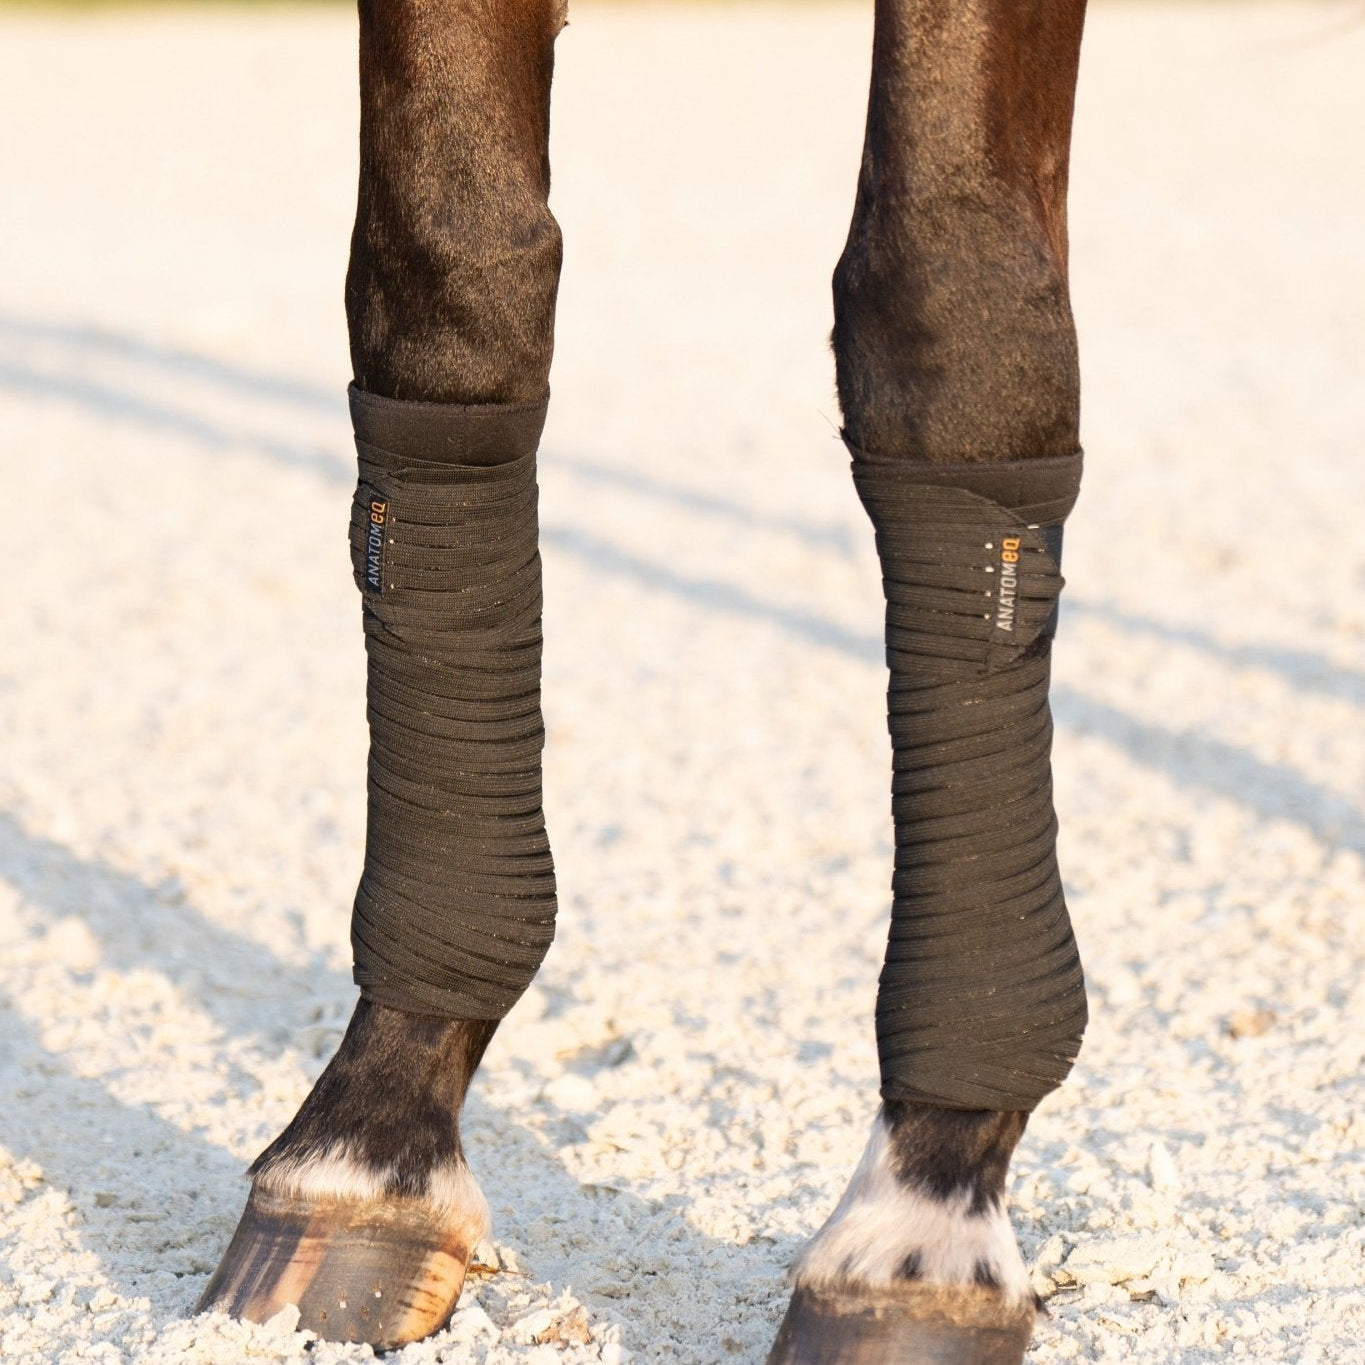 Anatomeq PoloPillows Bandage Liners - Breathable & Dirt Resistant - Equiluxe Tack